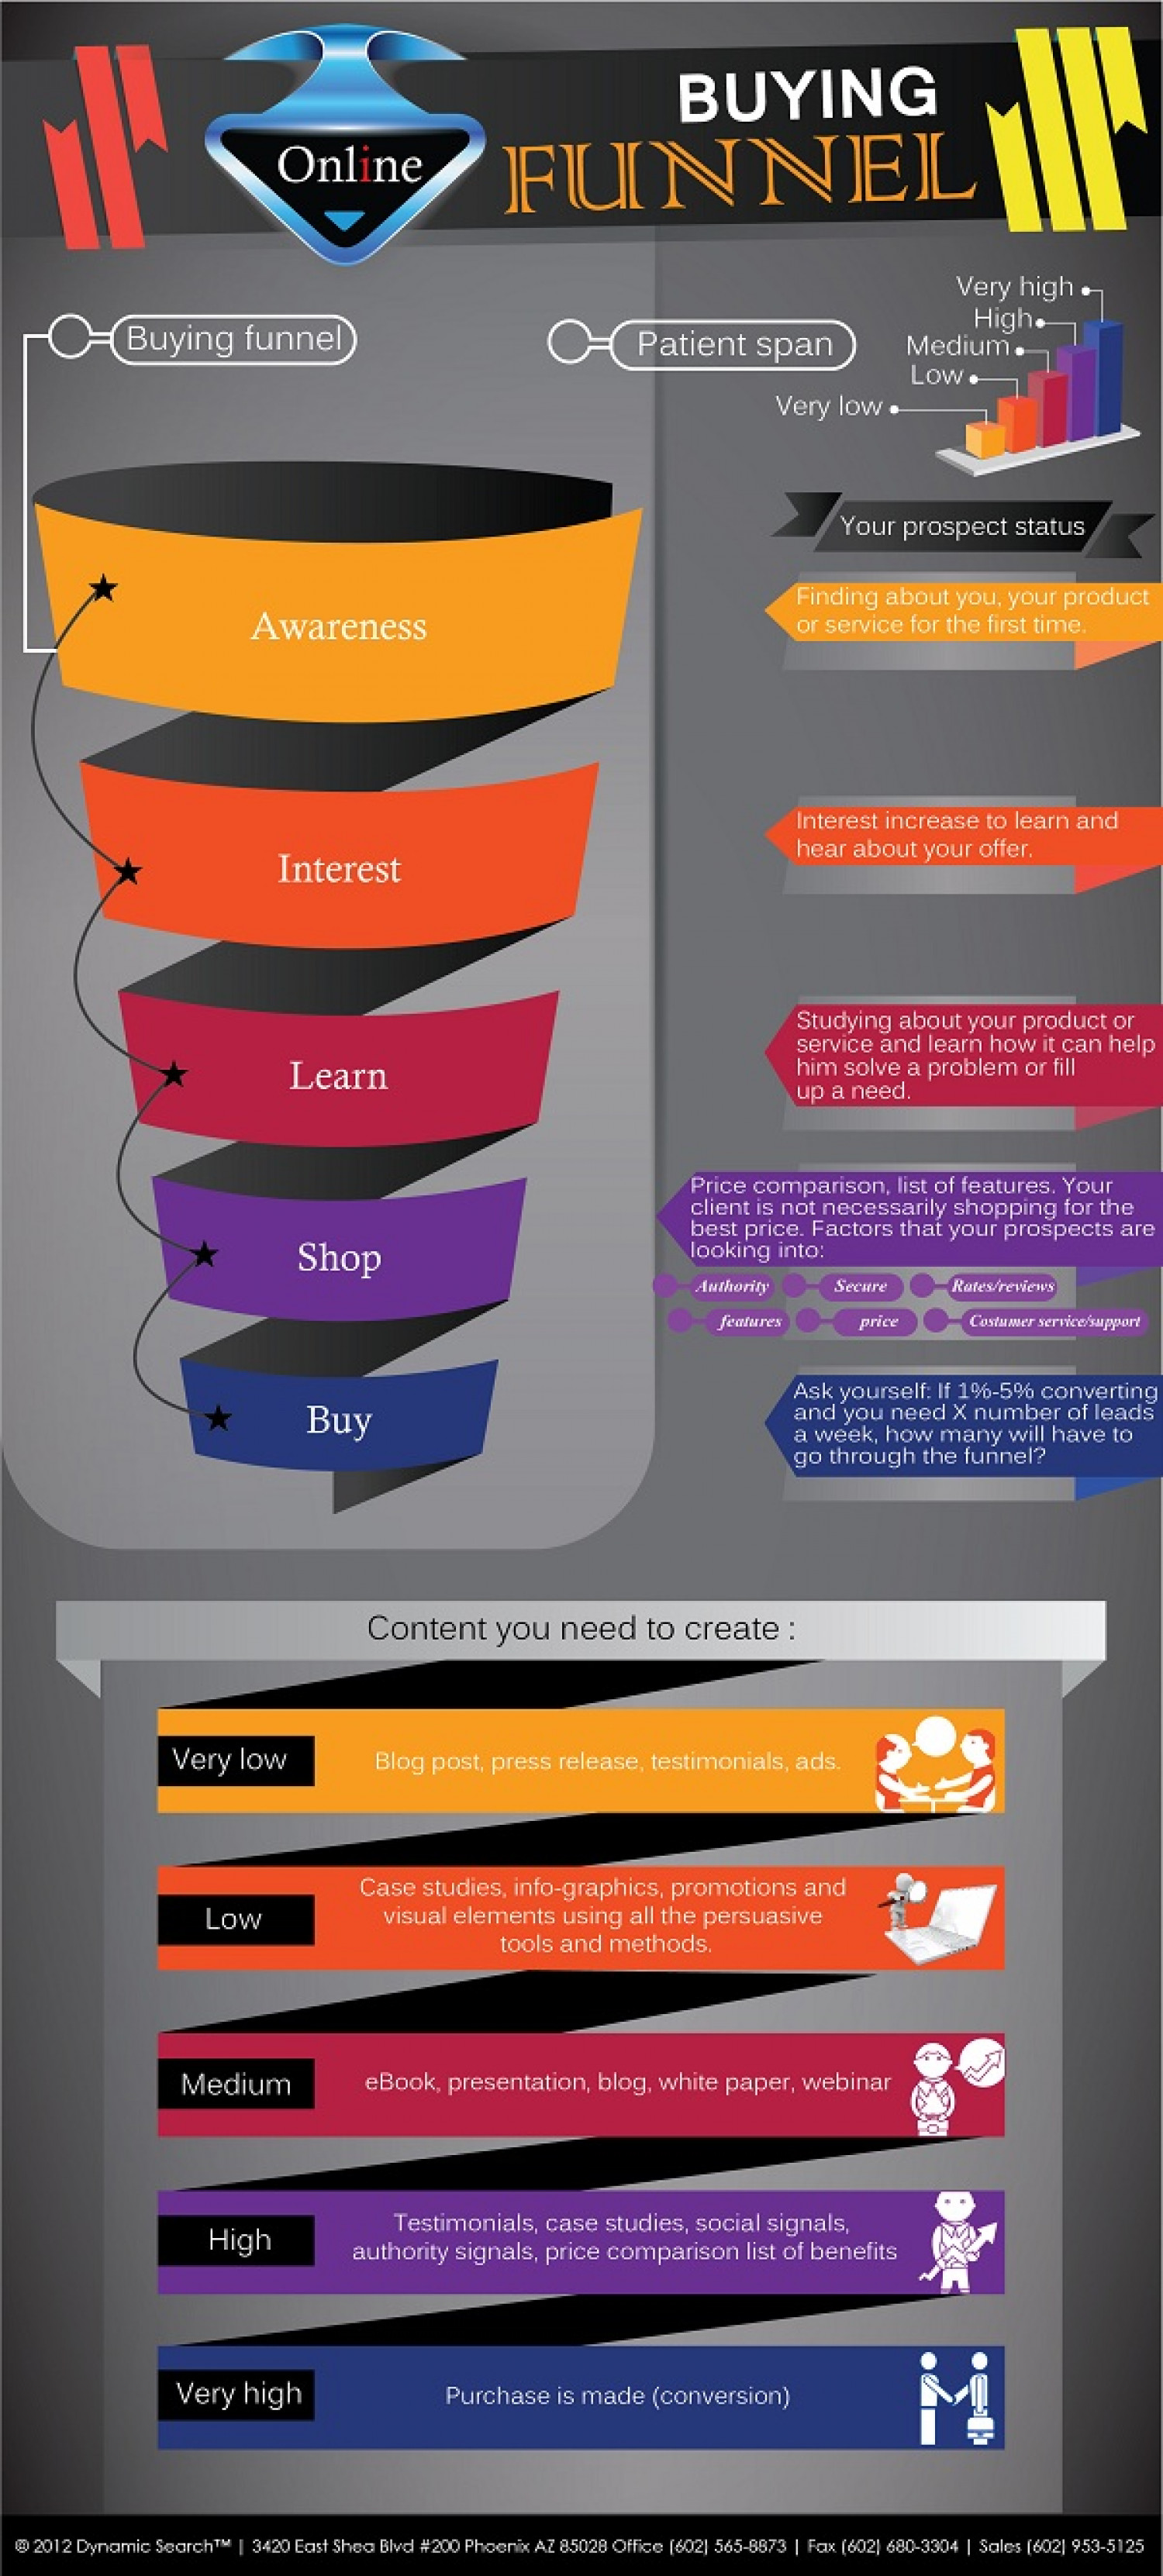 The Online Buying Funnel Infographic